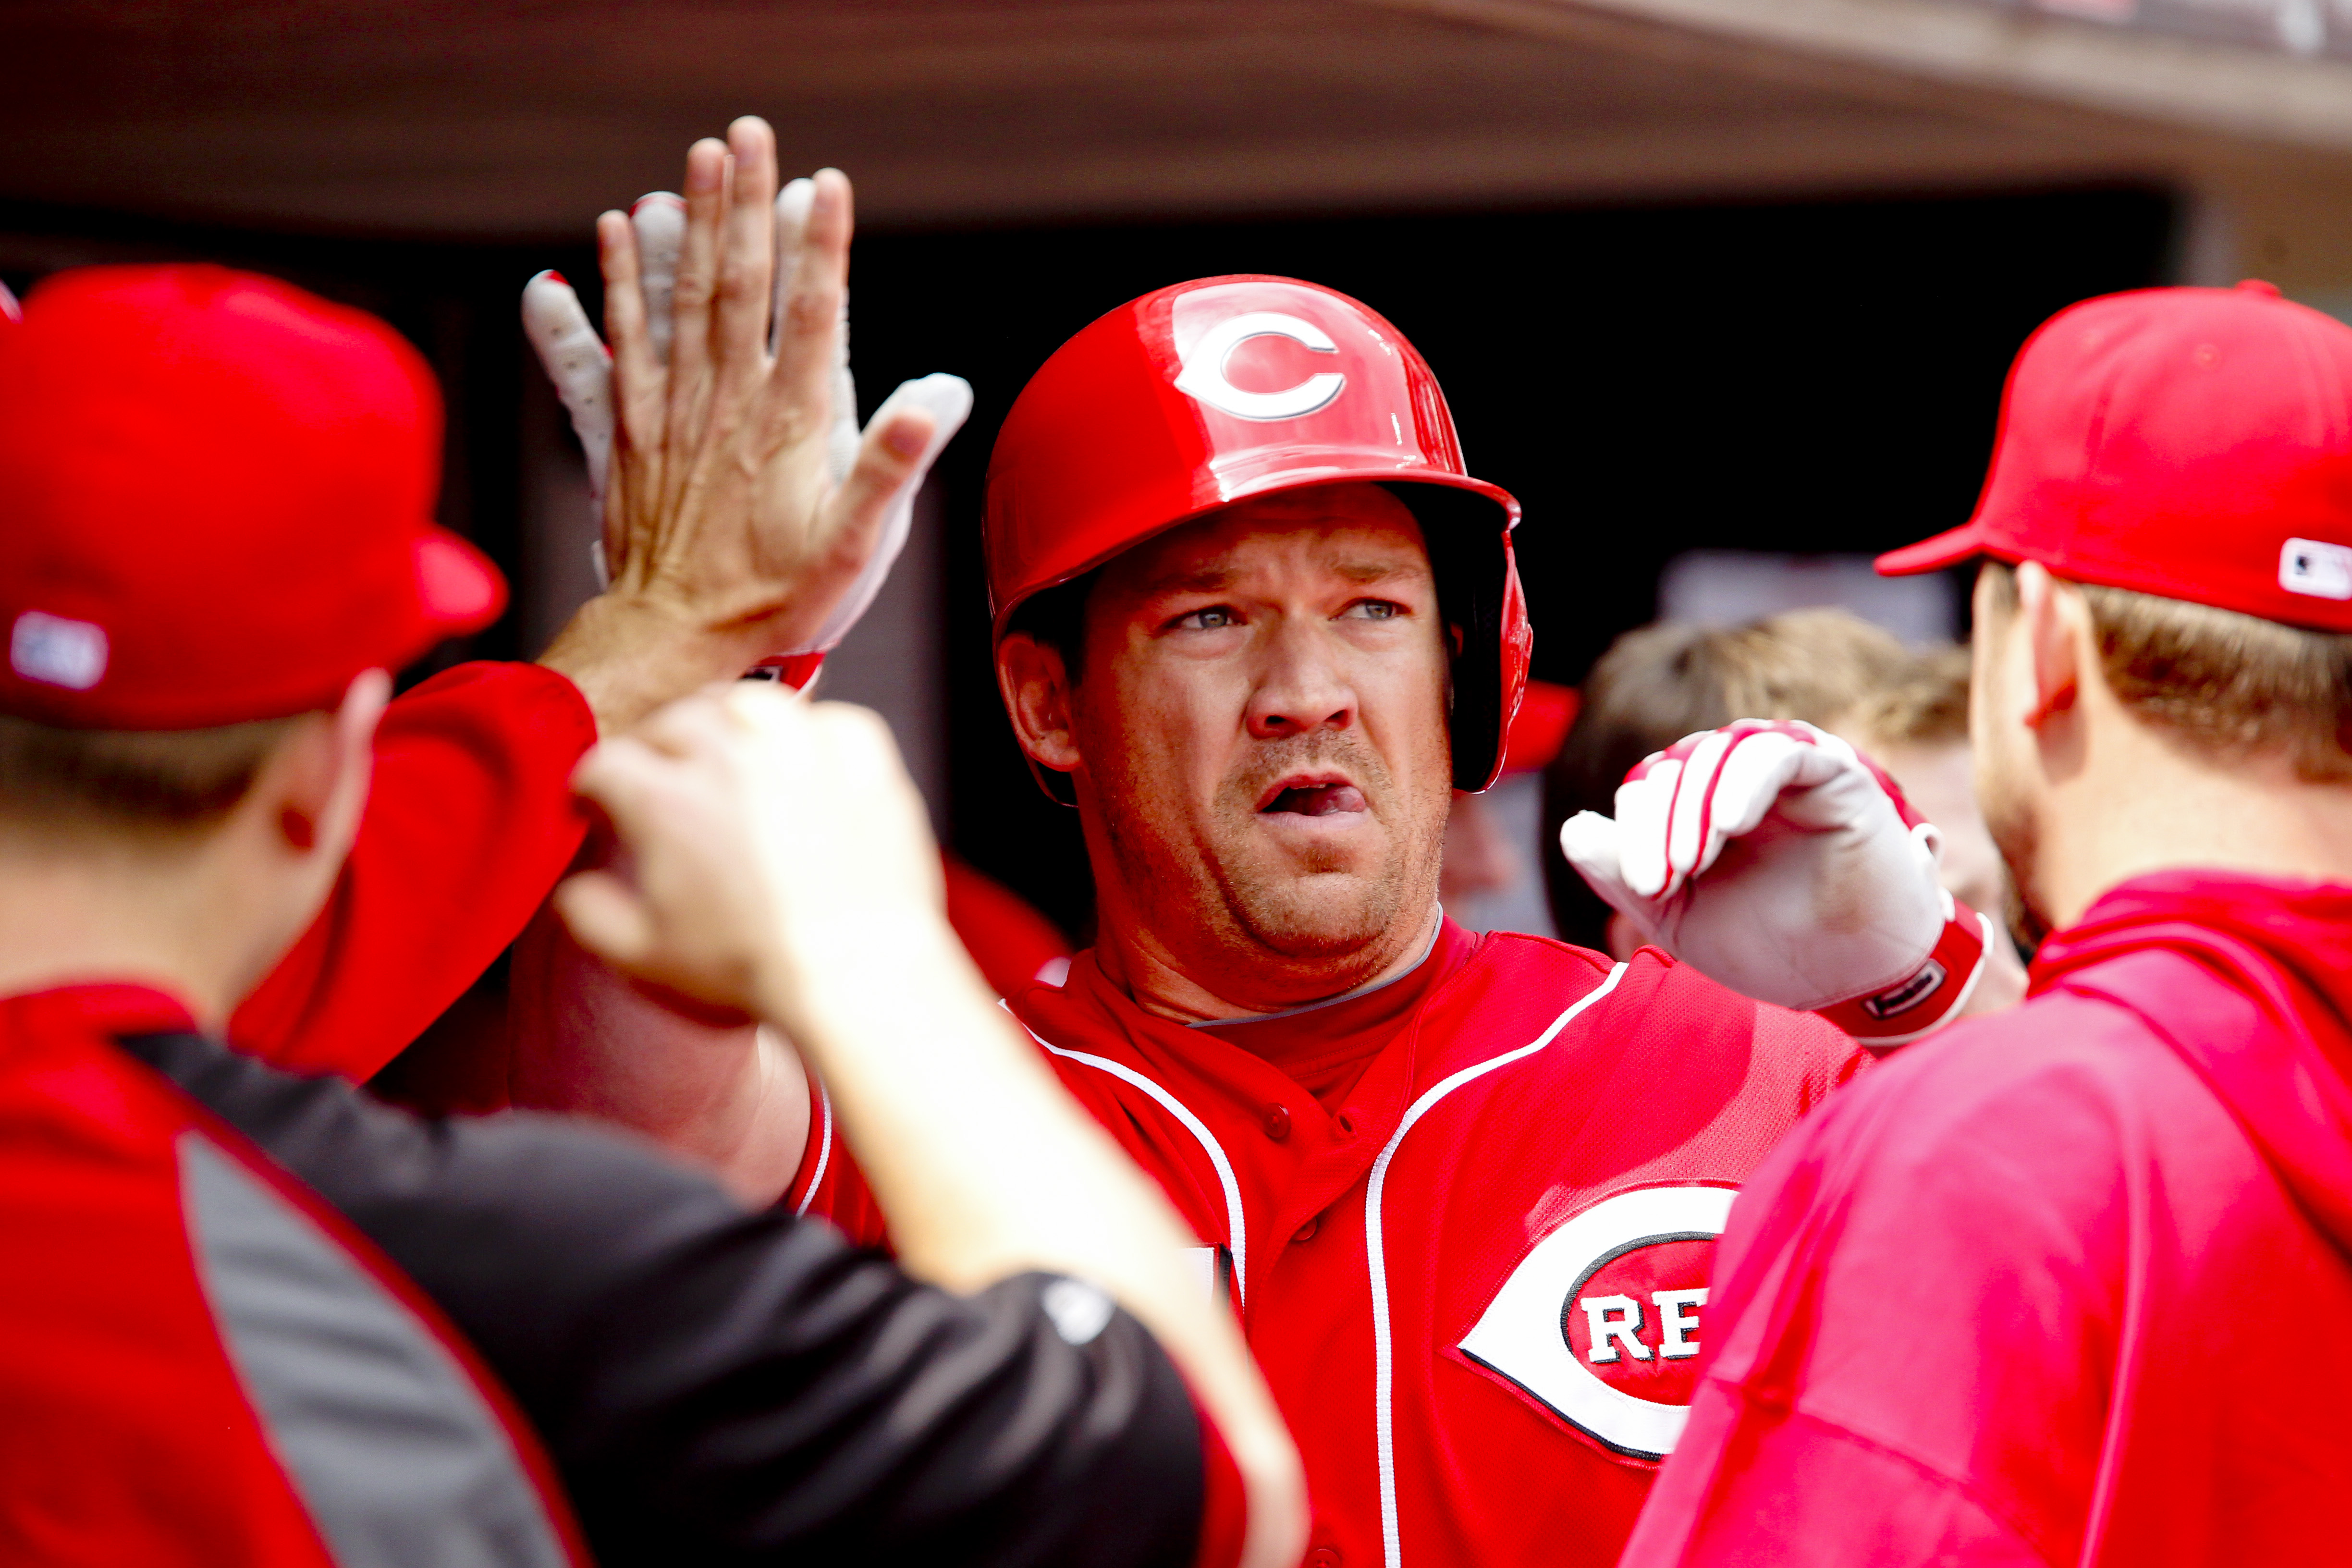 St. Louis Cardinals third baseman Scott Rolen may or may not get into the  Baseball Hall of Fame this year